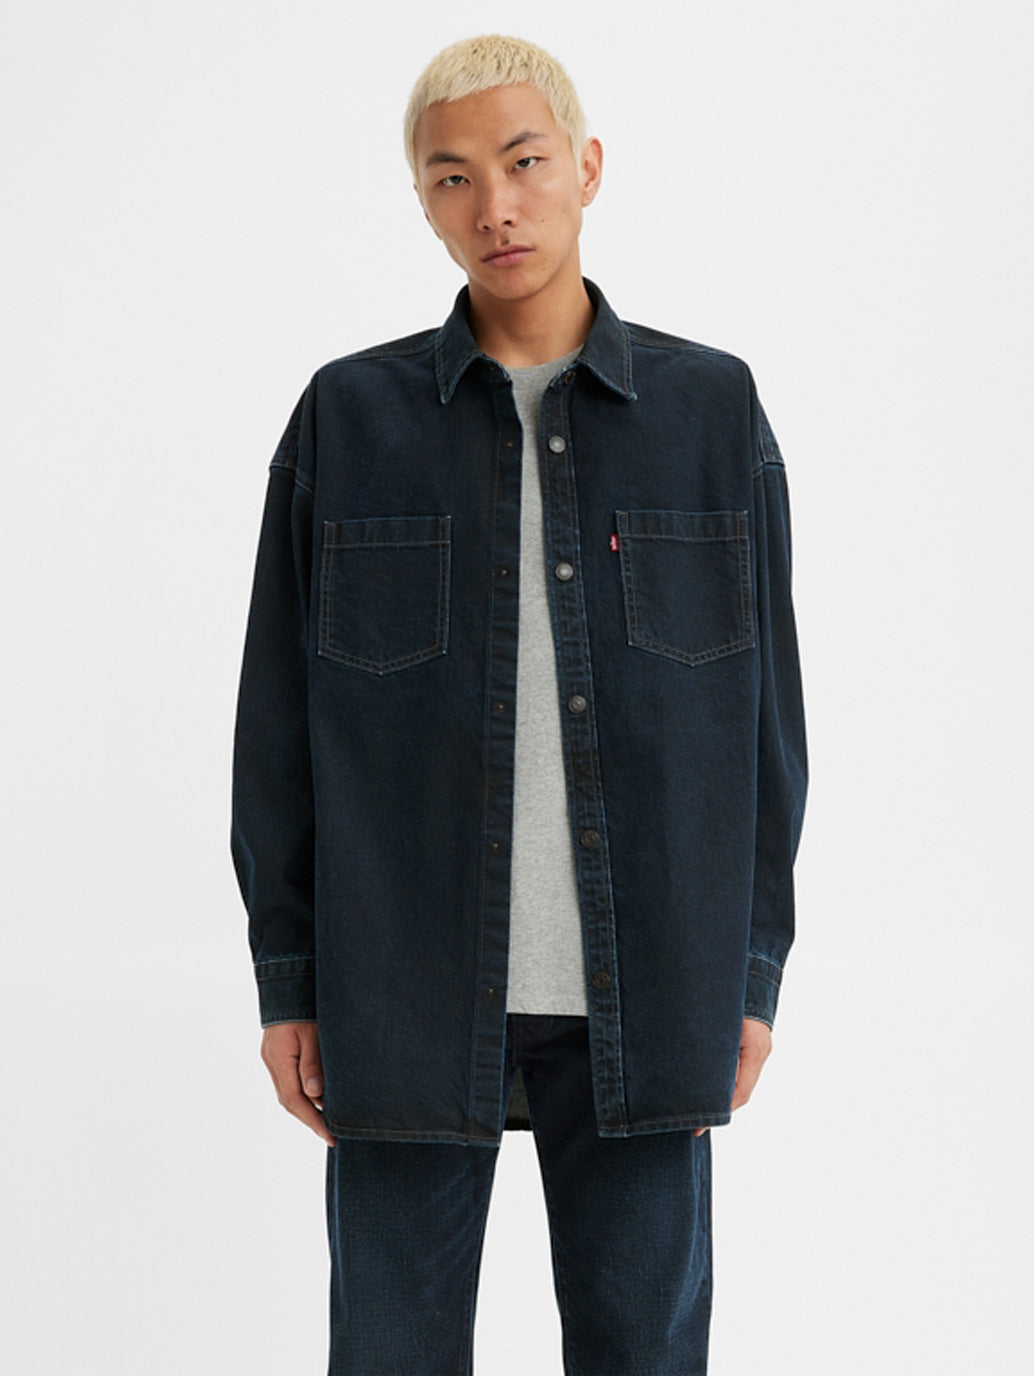 Buy from the Well Thread Collection for all – Levis India Store